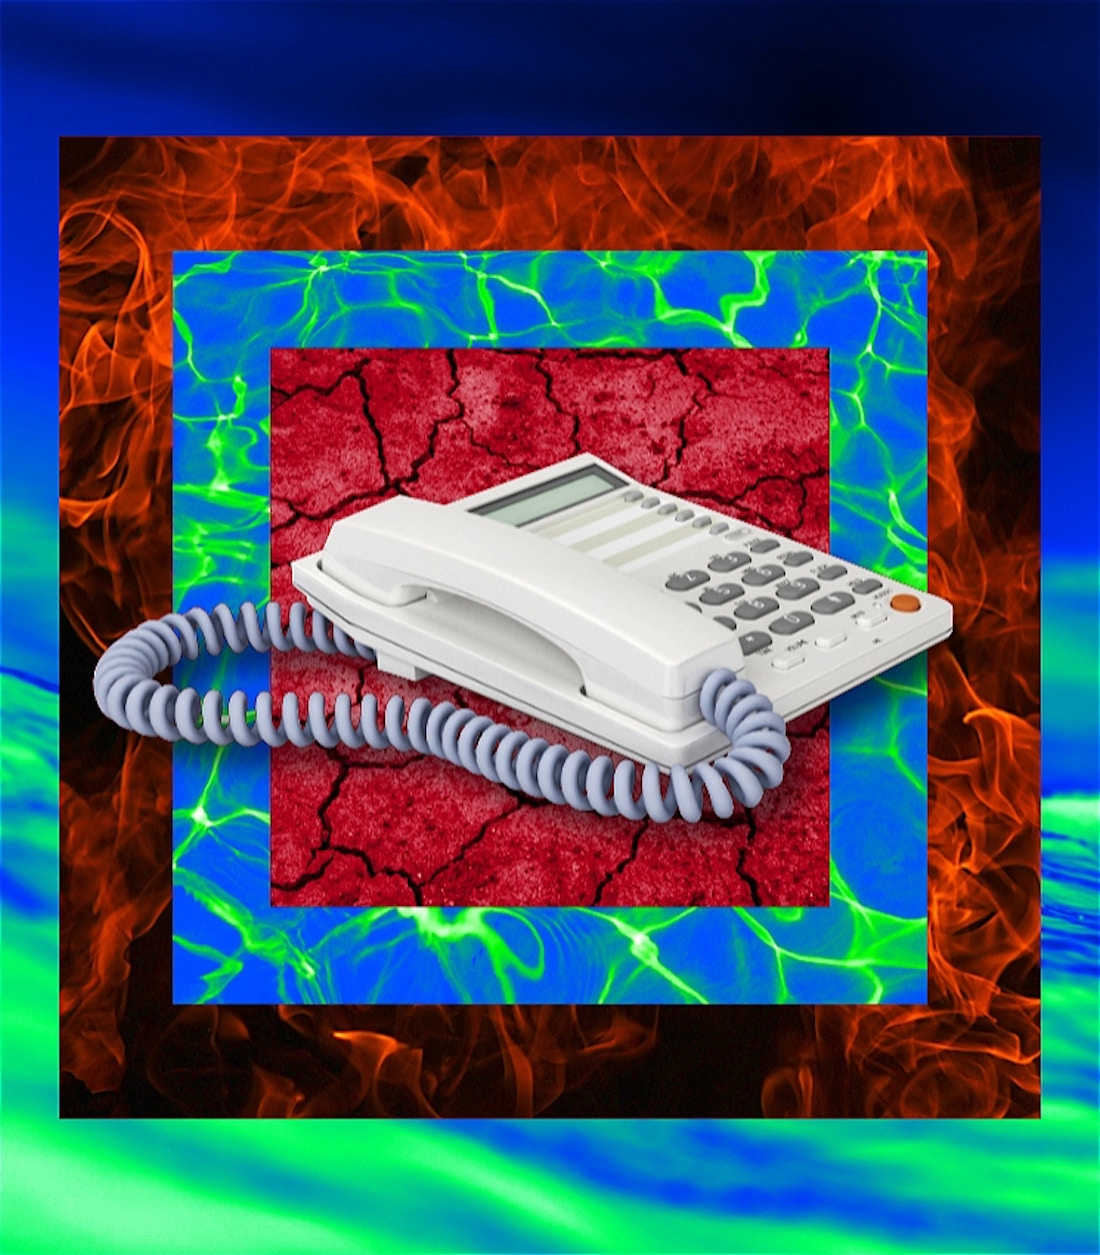 An old school home phone sits on a back ground of layers of cracked earth, water and flames.